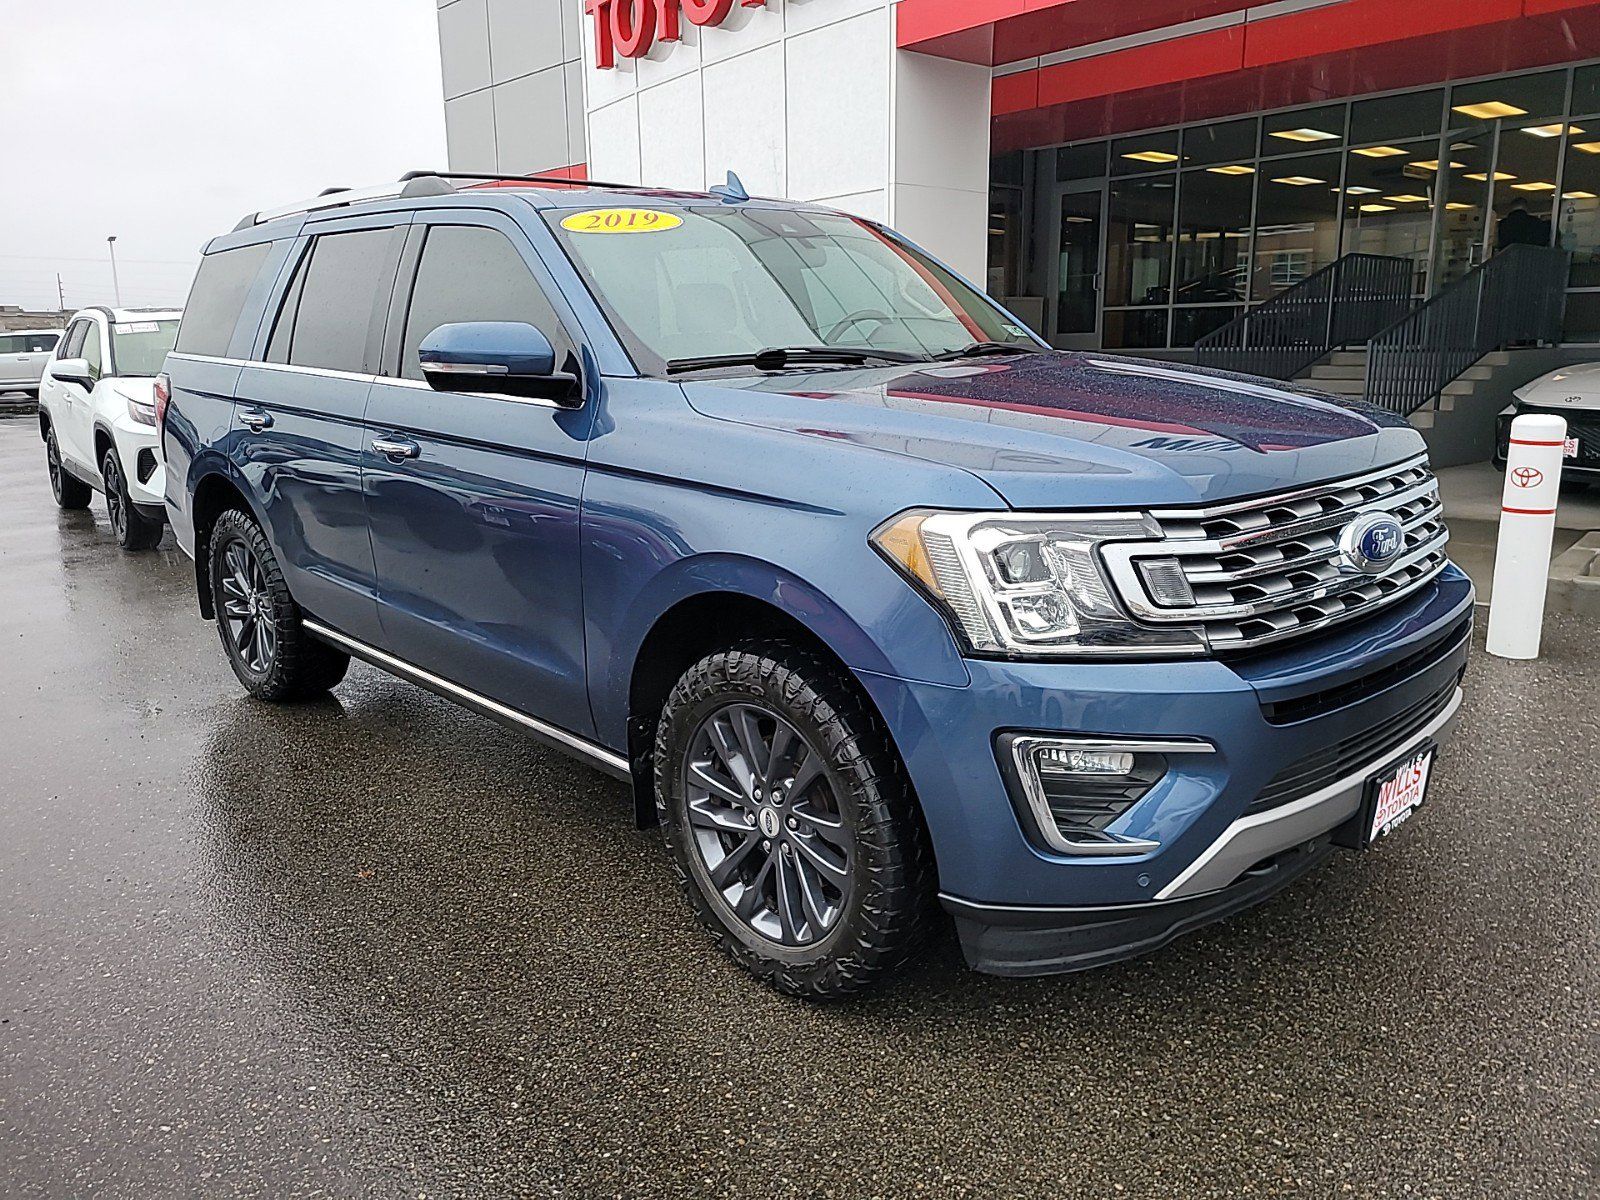 2019 - Ford - Expedition - $27,897